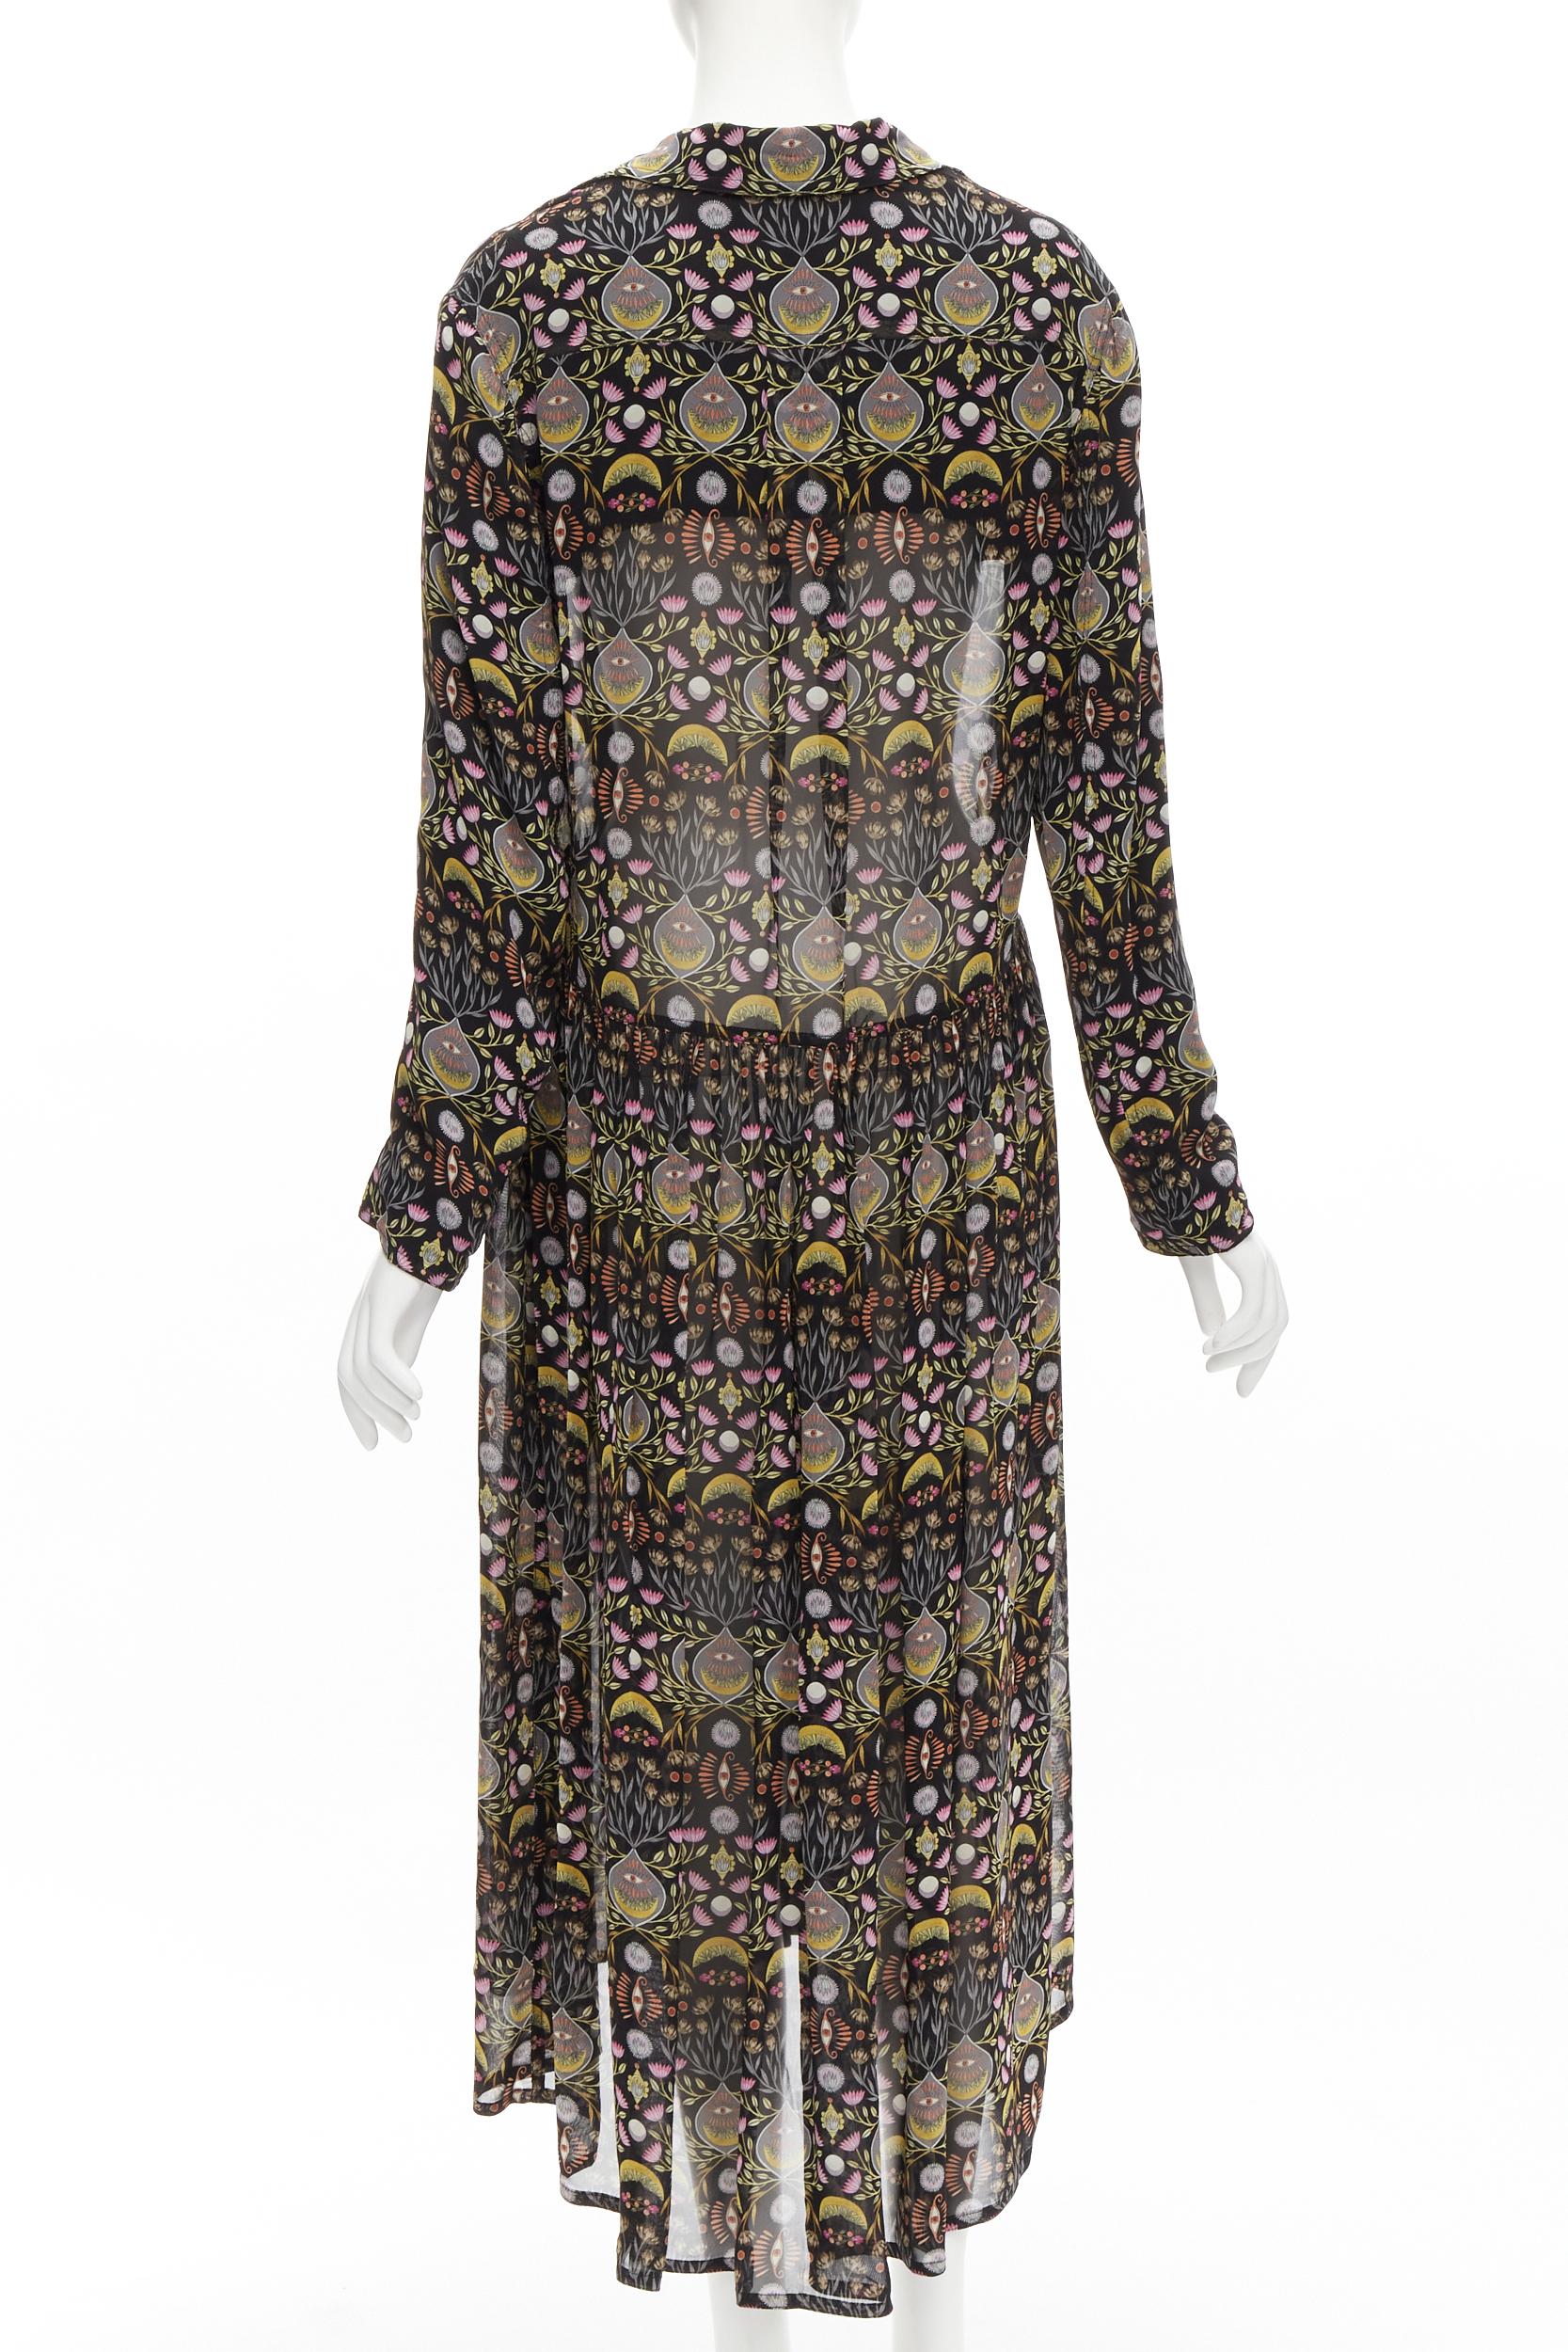 CHLOE 2018 Mystic Eye black yellow viscose bohemian print midi dress FR34 XS In Excellent Condition For Sale In Hong Kong, NT